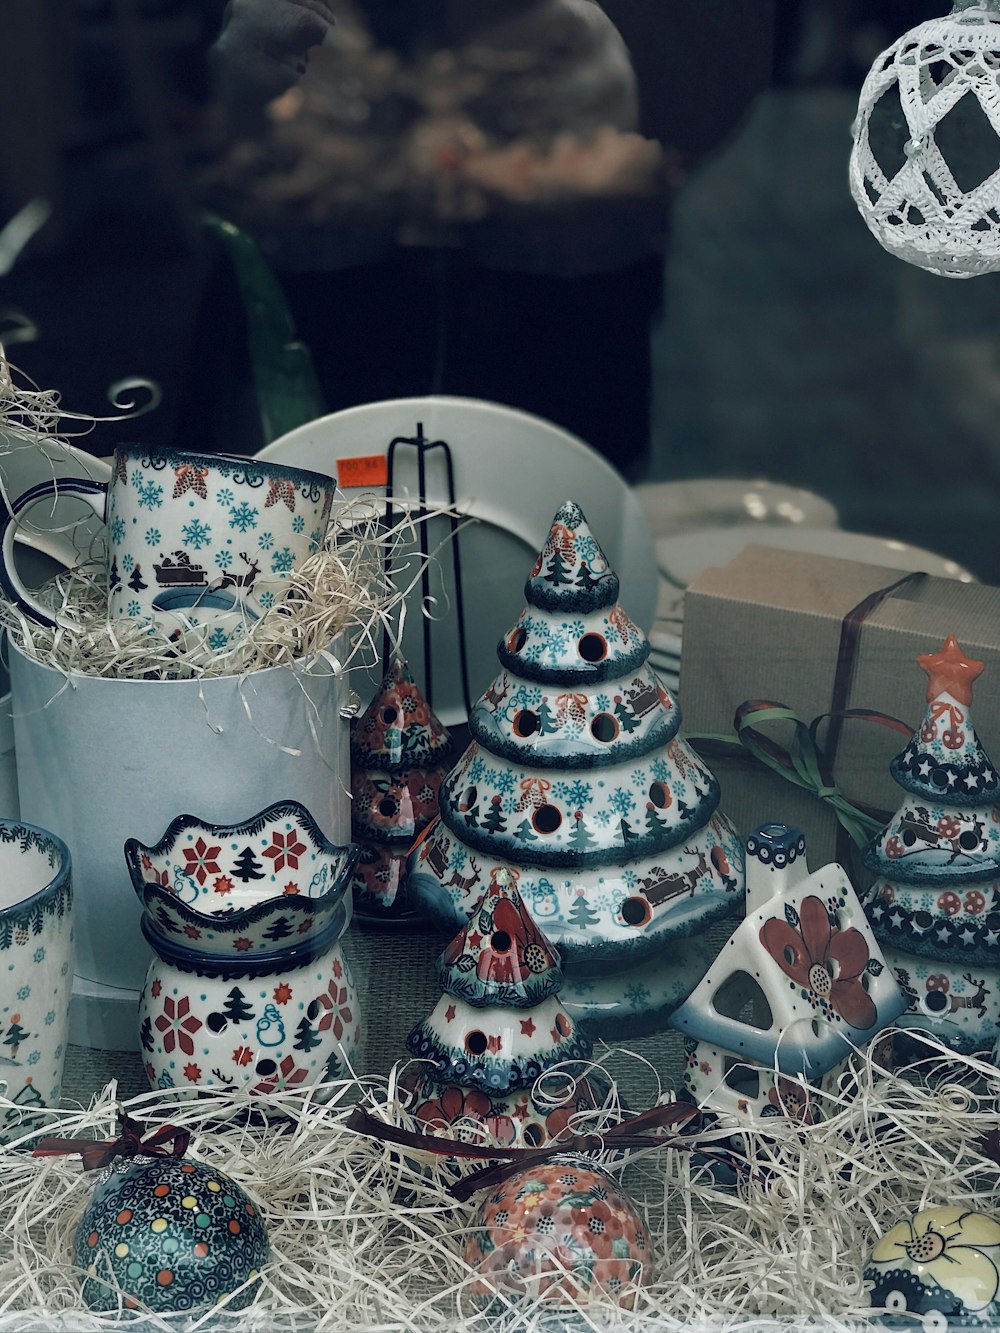 a display of ceramic christmas trees in a store window